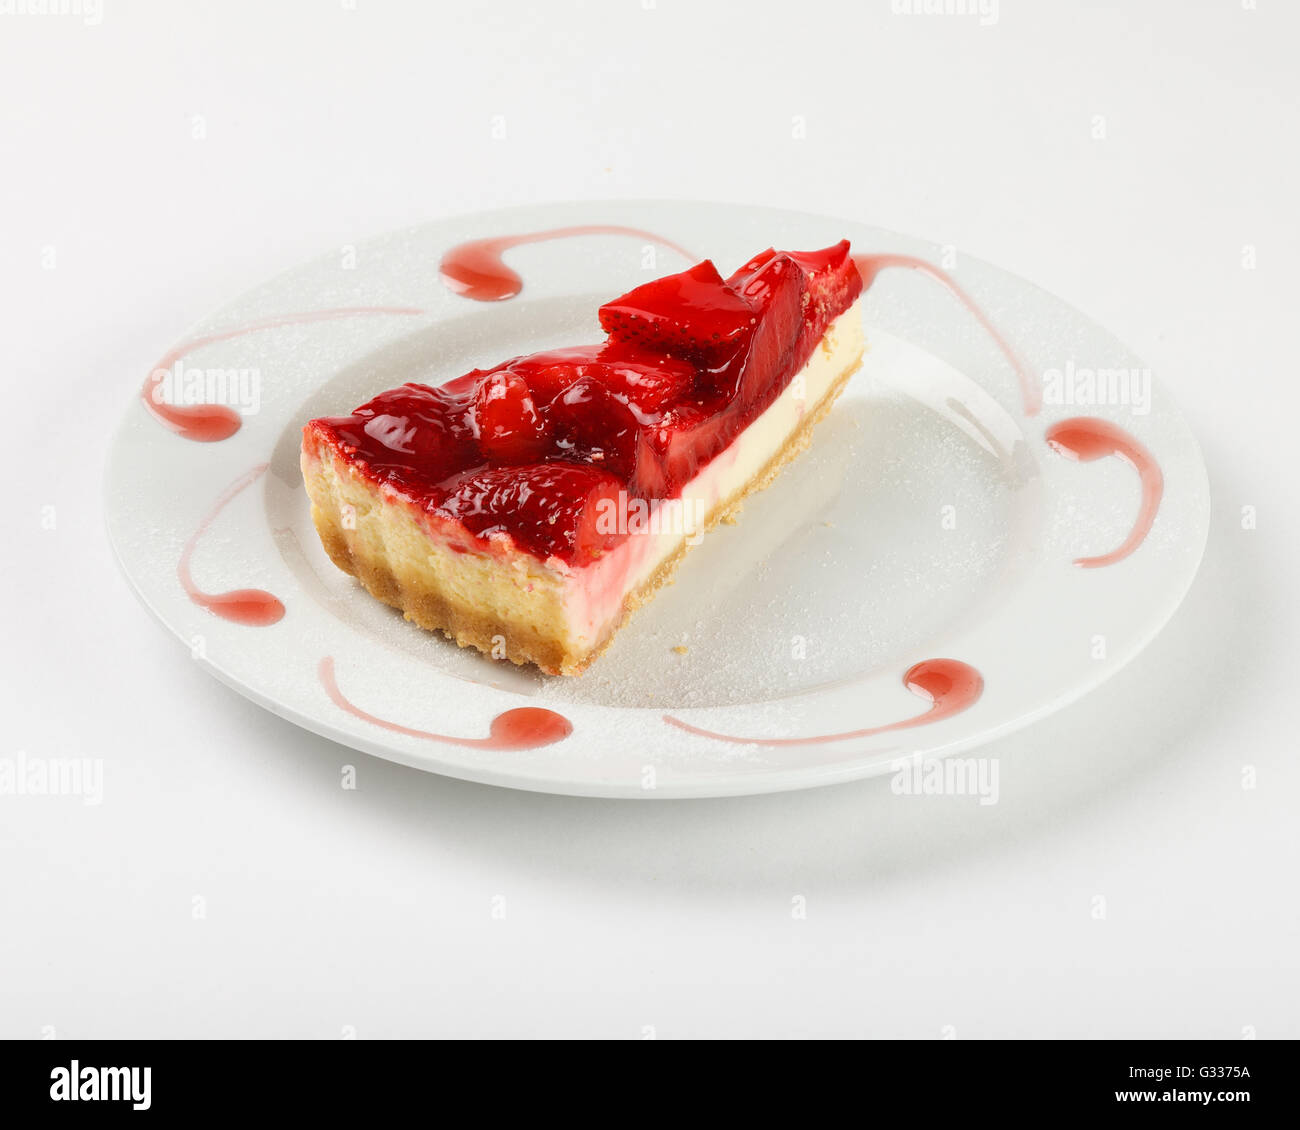 Delicious cheesecake with strawberry jelly and jam on the plate on white background. Close up side view. Stock Photo